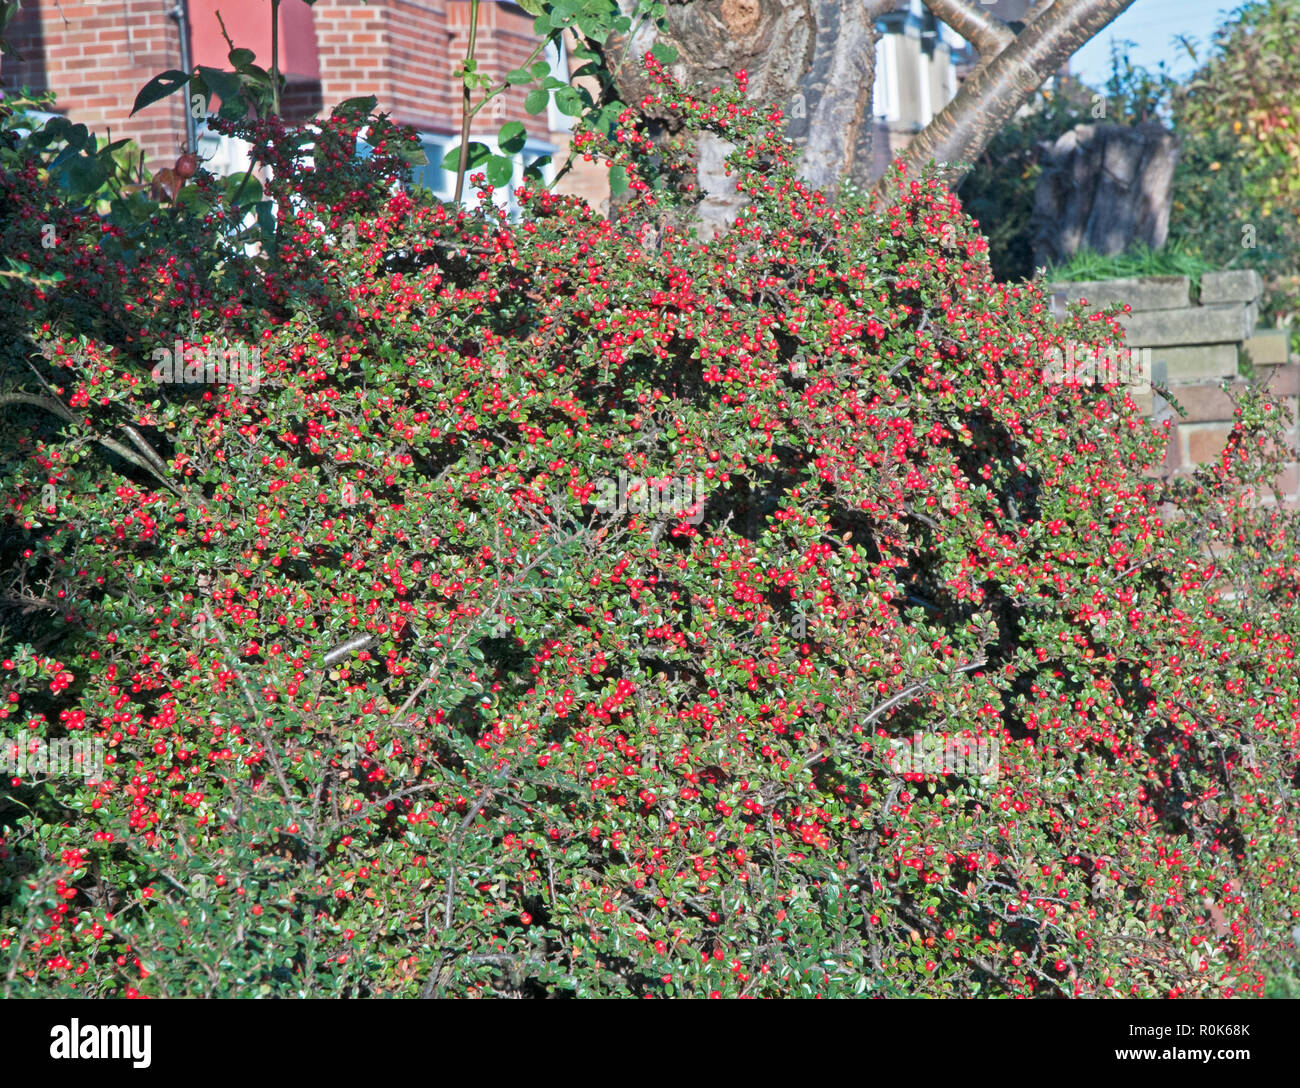 Cotoneaster horizontalis covered with red berries in autumn. Deciduous shrub that flowers in spring and leaves turn red in autumn . Stock Photo